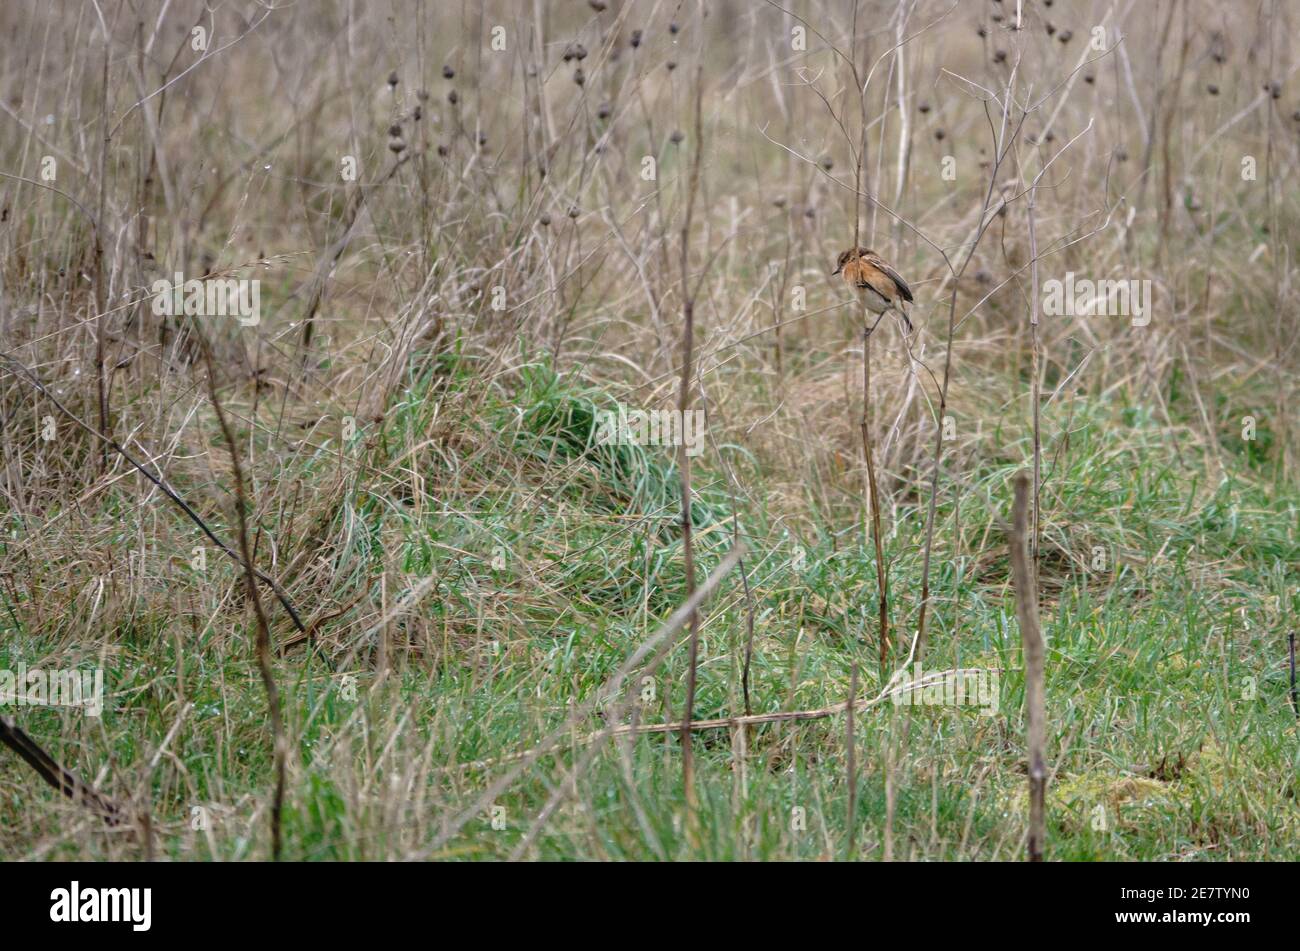 a stonechat hangs on to a tall winter flower stalk in a meadow Stock Photo